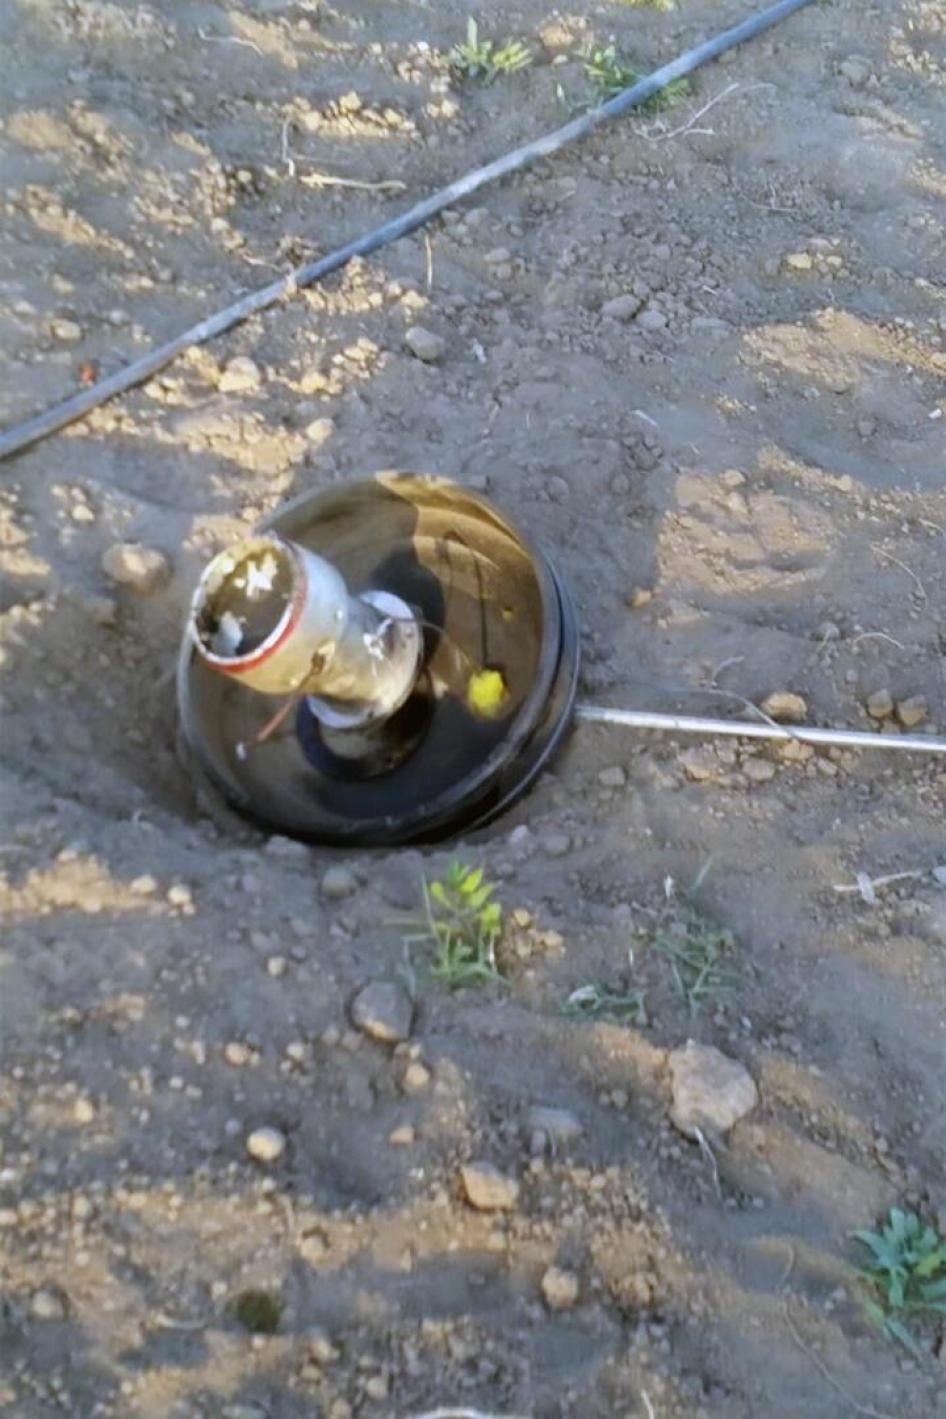 Photo of part of the bursting mechanism from an ASTROS cluster munition rocket lies where it reportedly landed at Qahza, Saada governorate on February 22, 2017. 